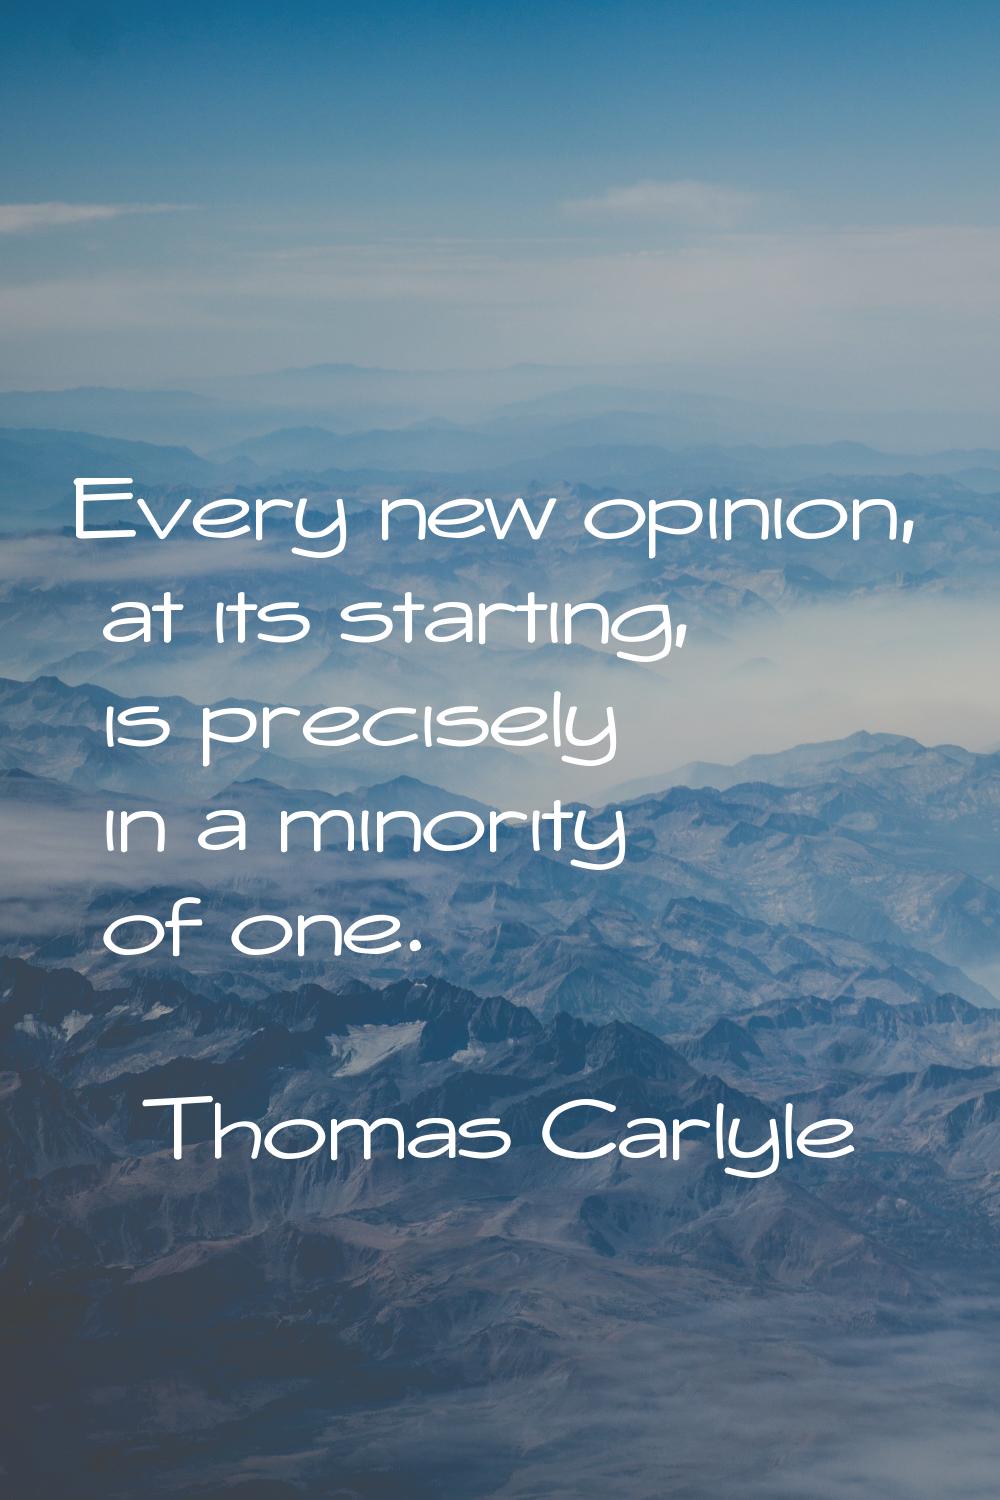 Every new opinion, at its starting, is precisely in a minority of one.